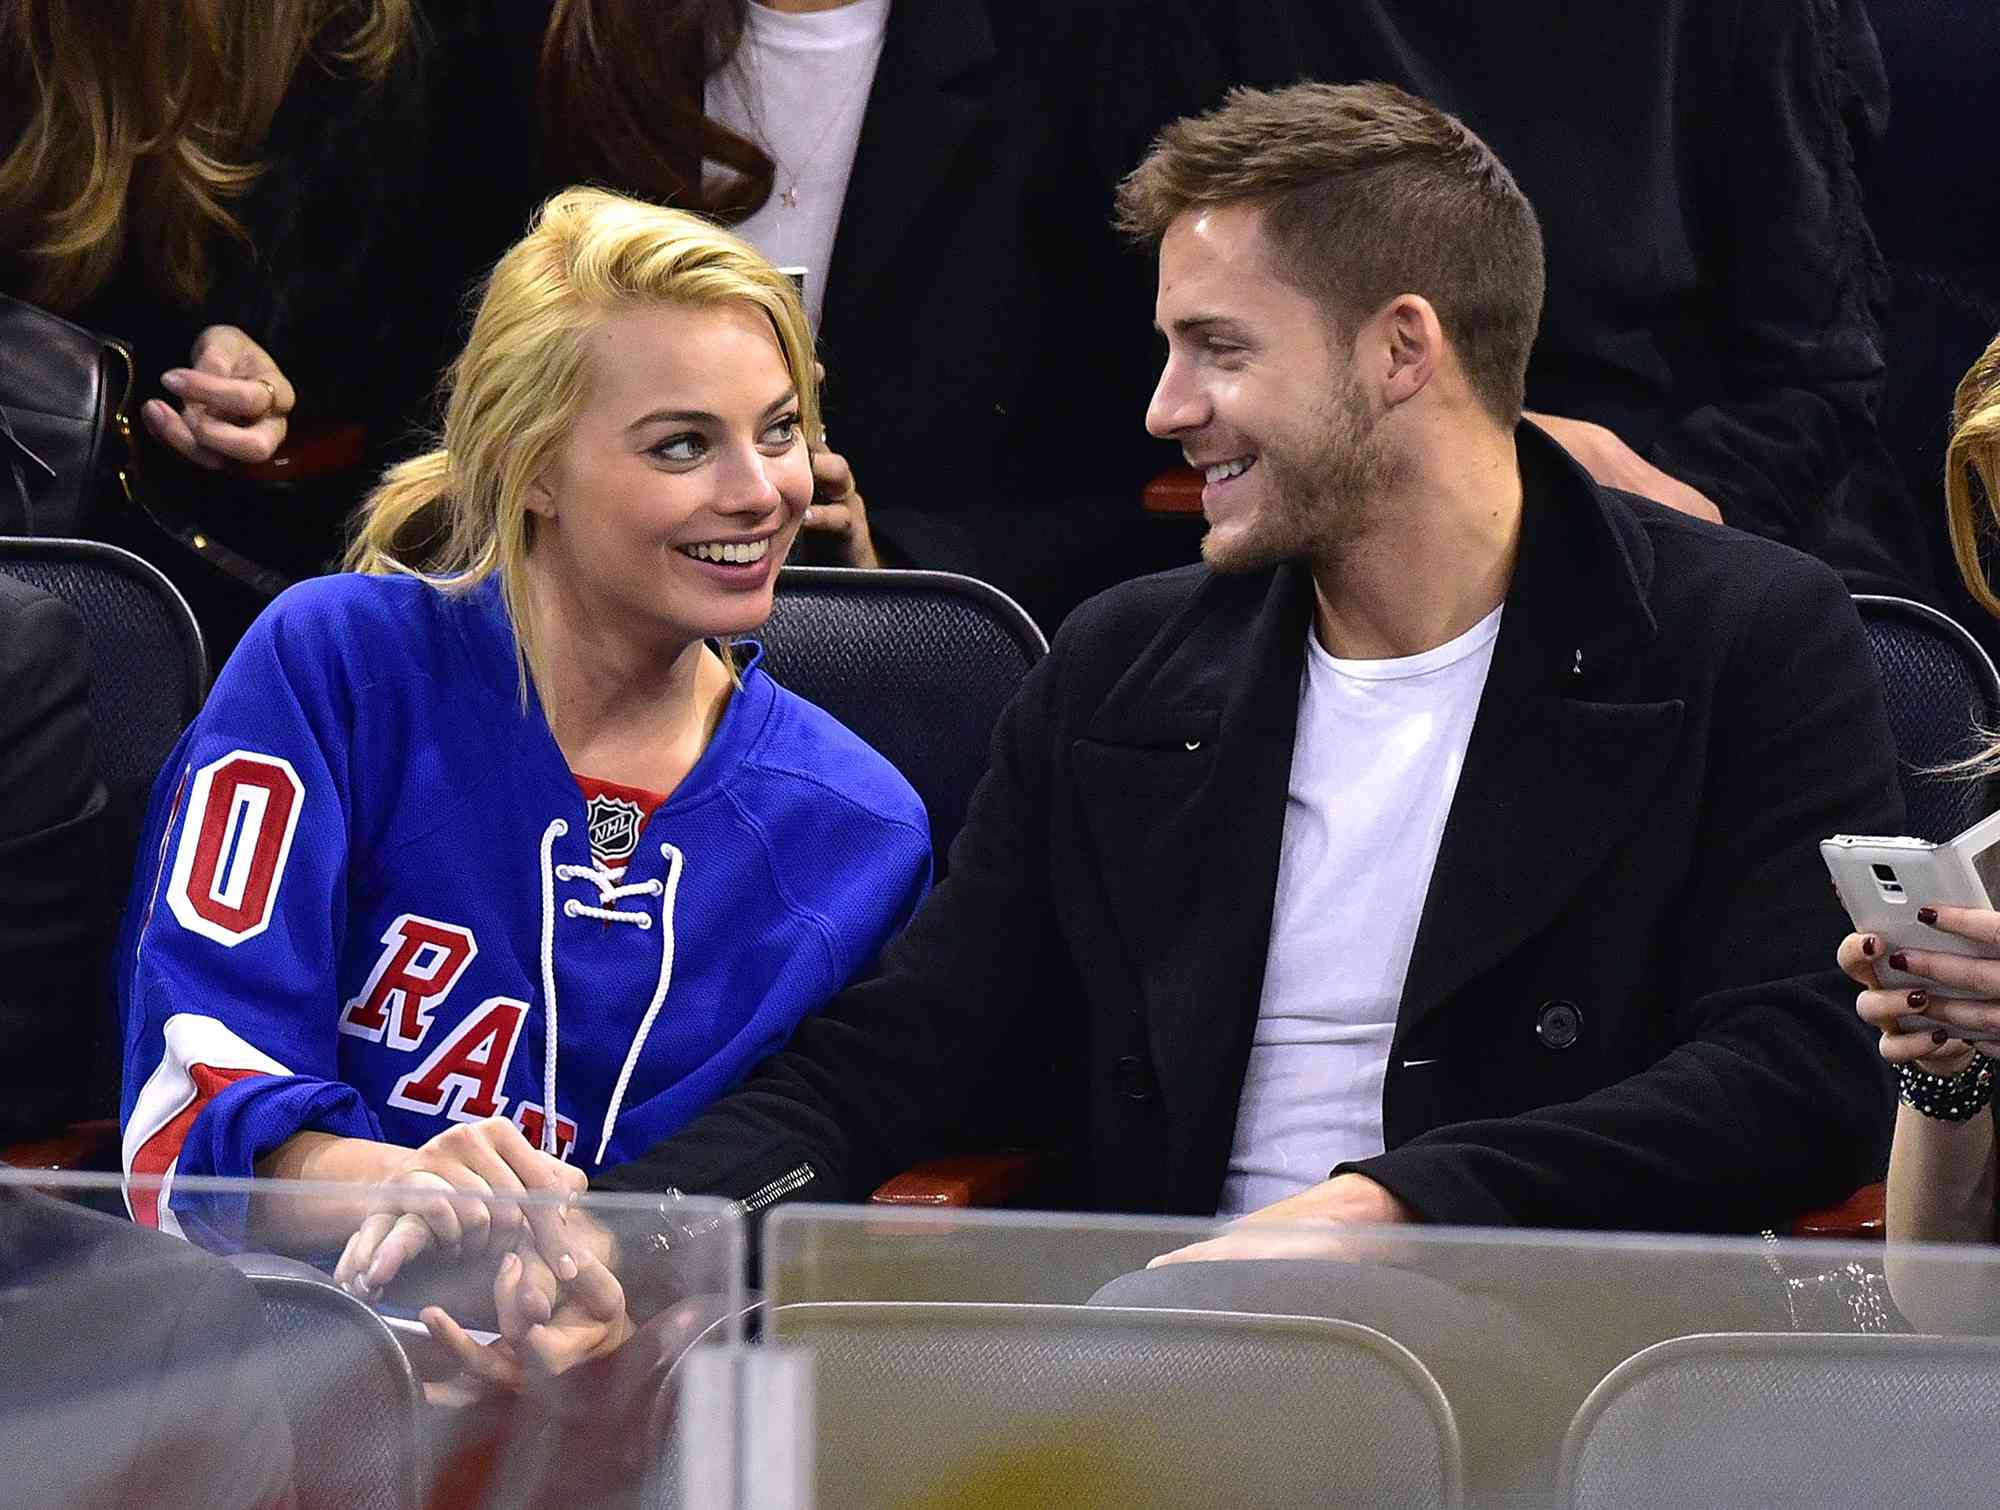 Margot Robbie and Tom Ackerley attend the Arizona Coyotes vs New York Rangers game at Madison Square Garden on February 26, 2015 in New York City